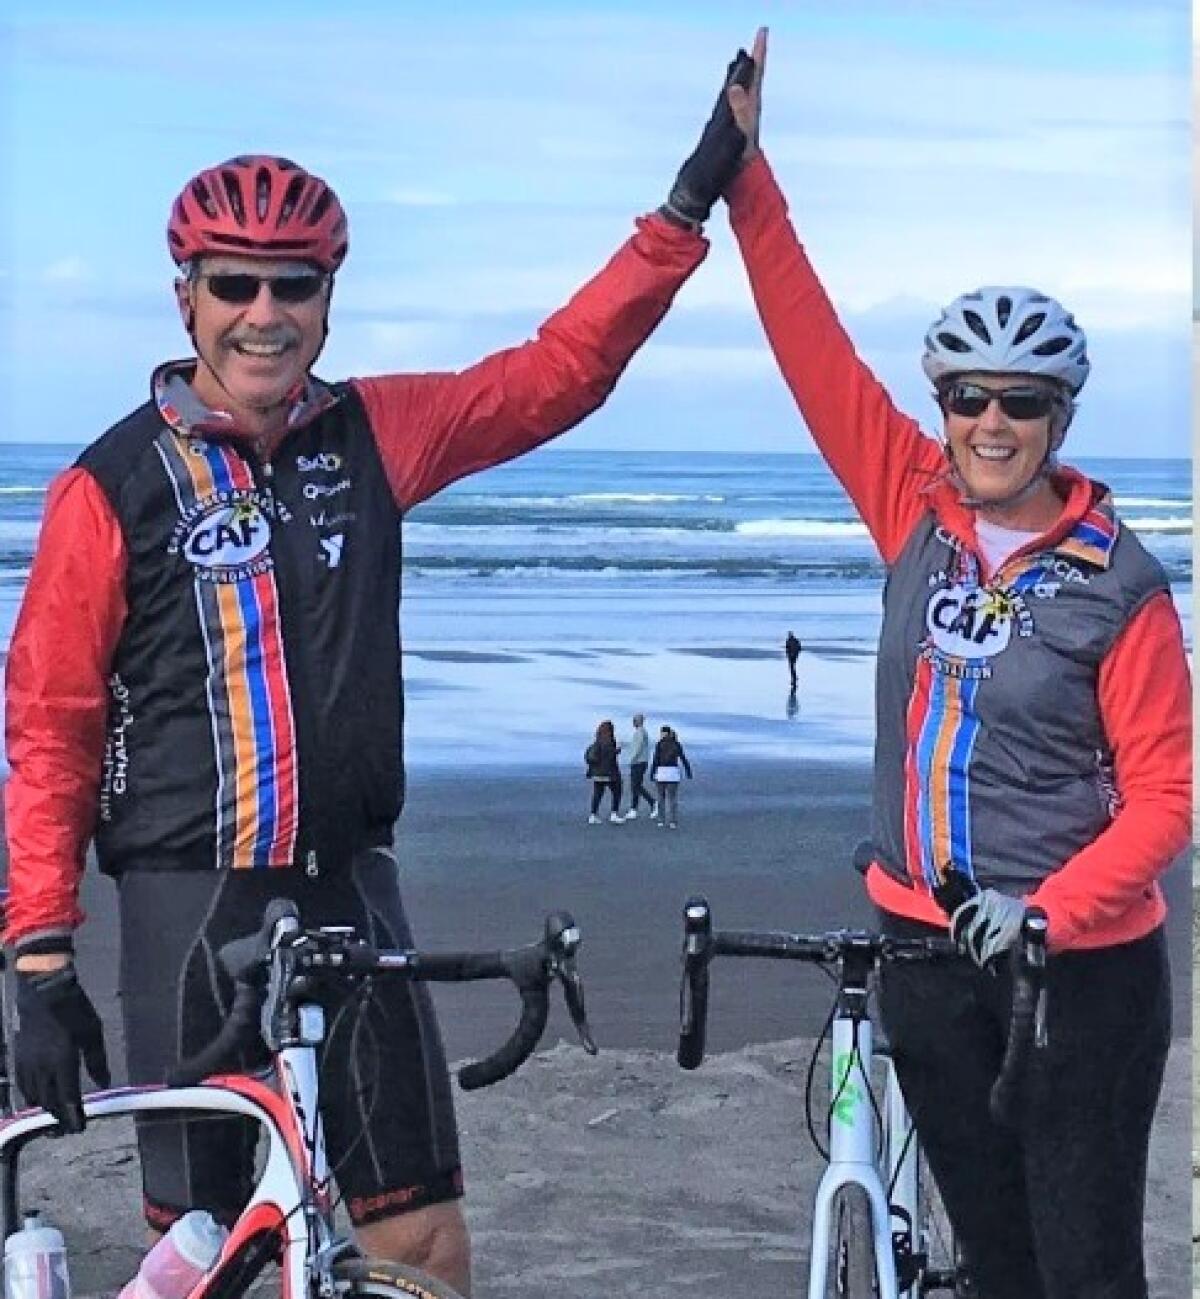 Bill Geppert and wife, Amy, left the West Coast April 29 on a bike ride to Virginia Beach to benefit challenged athletes.